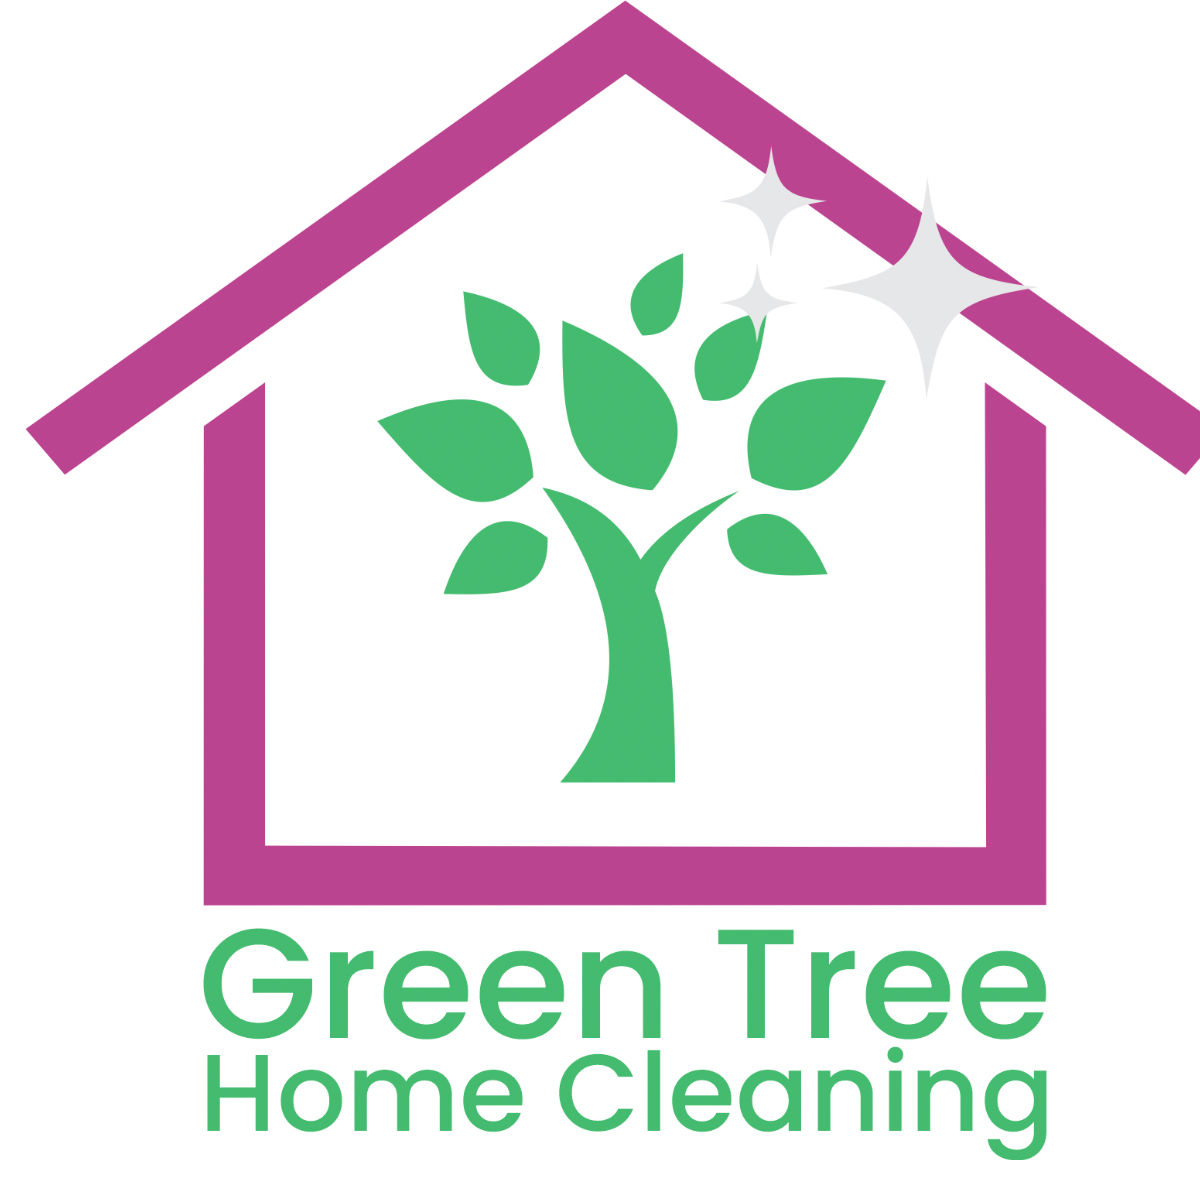 Green Tree Home Cleaning.